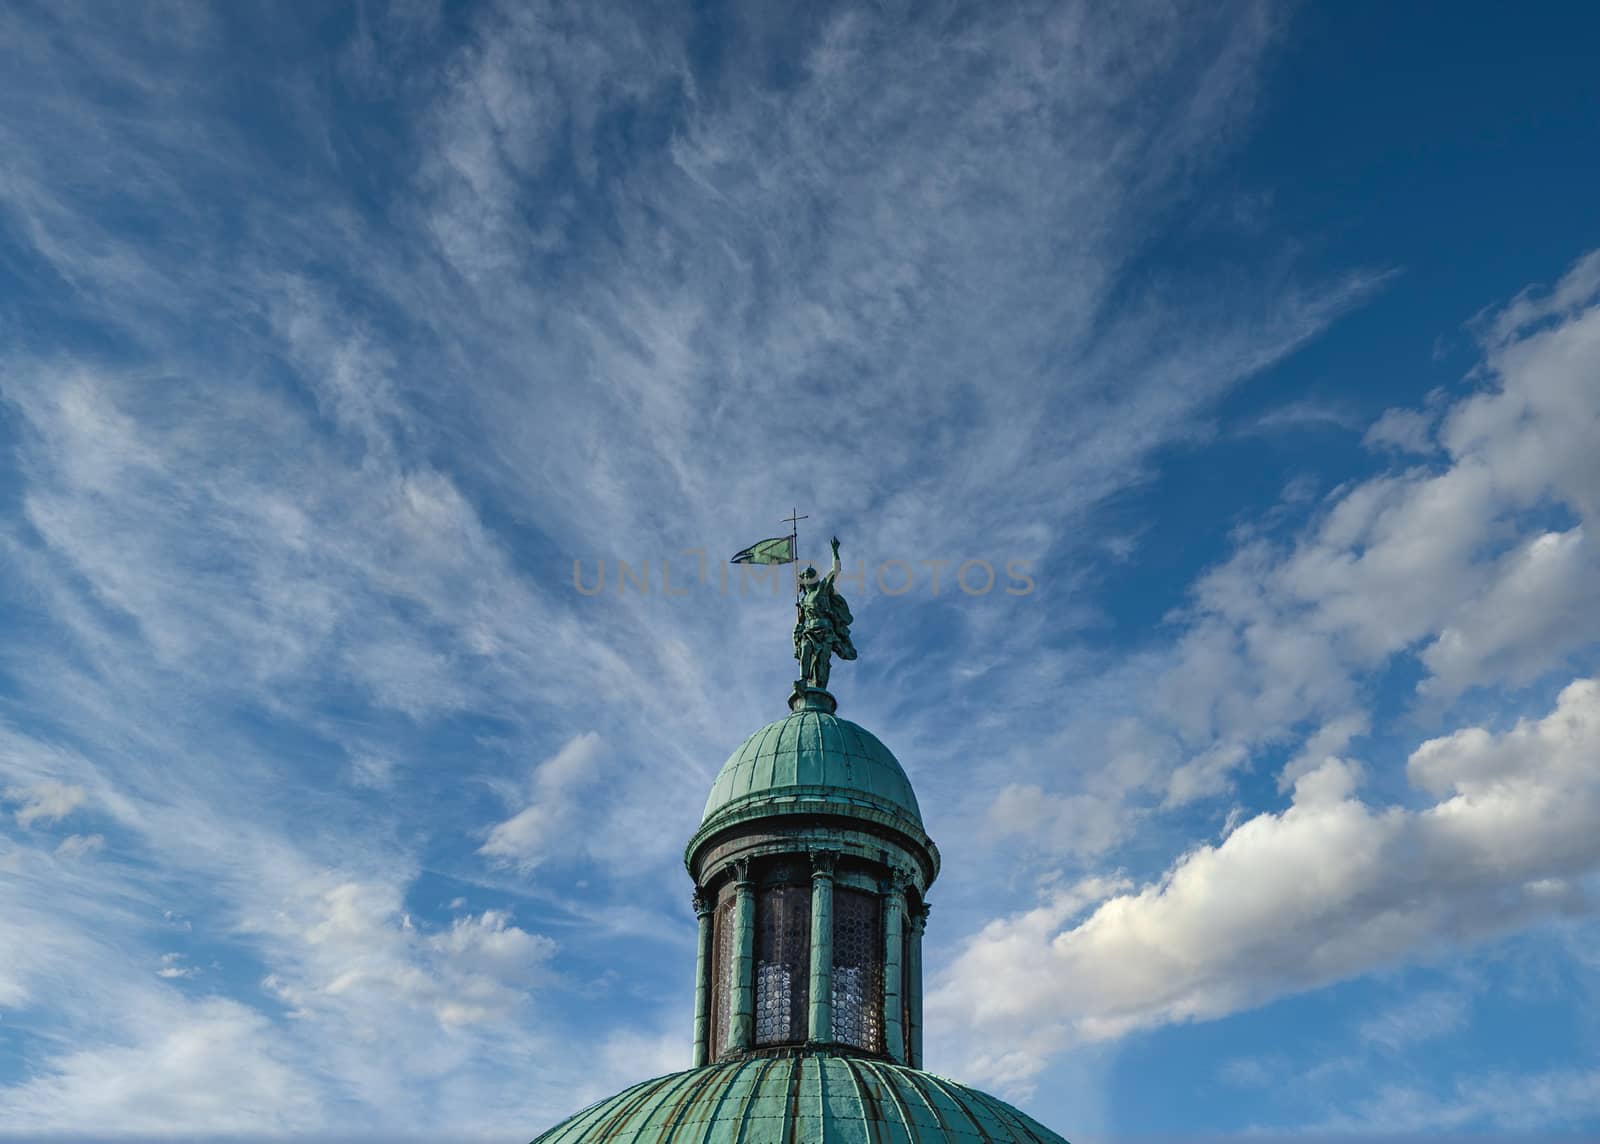 Old Statue on Green Cupola Against Blue Sky